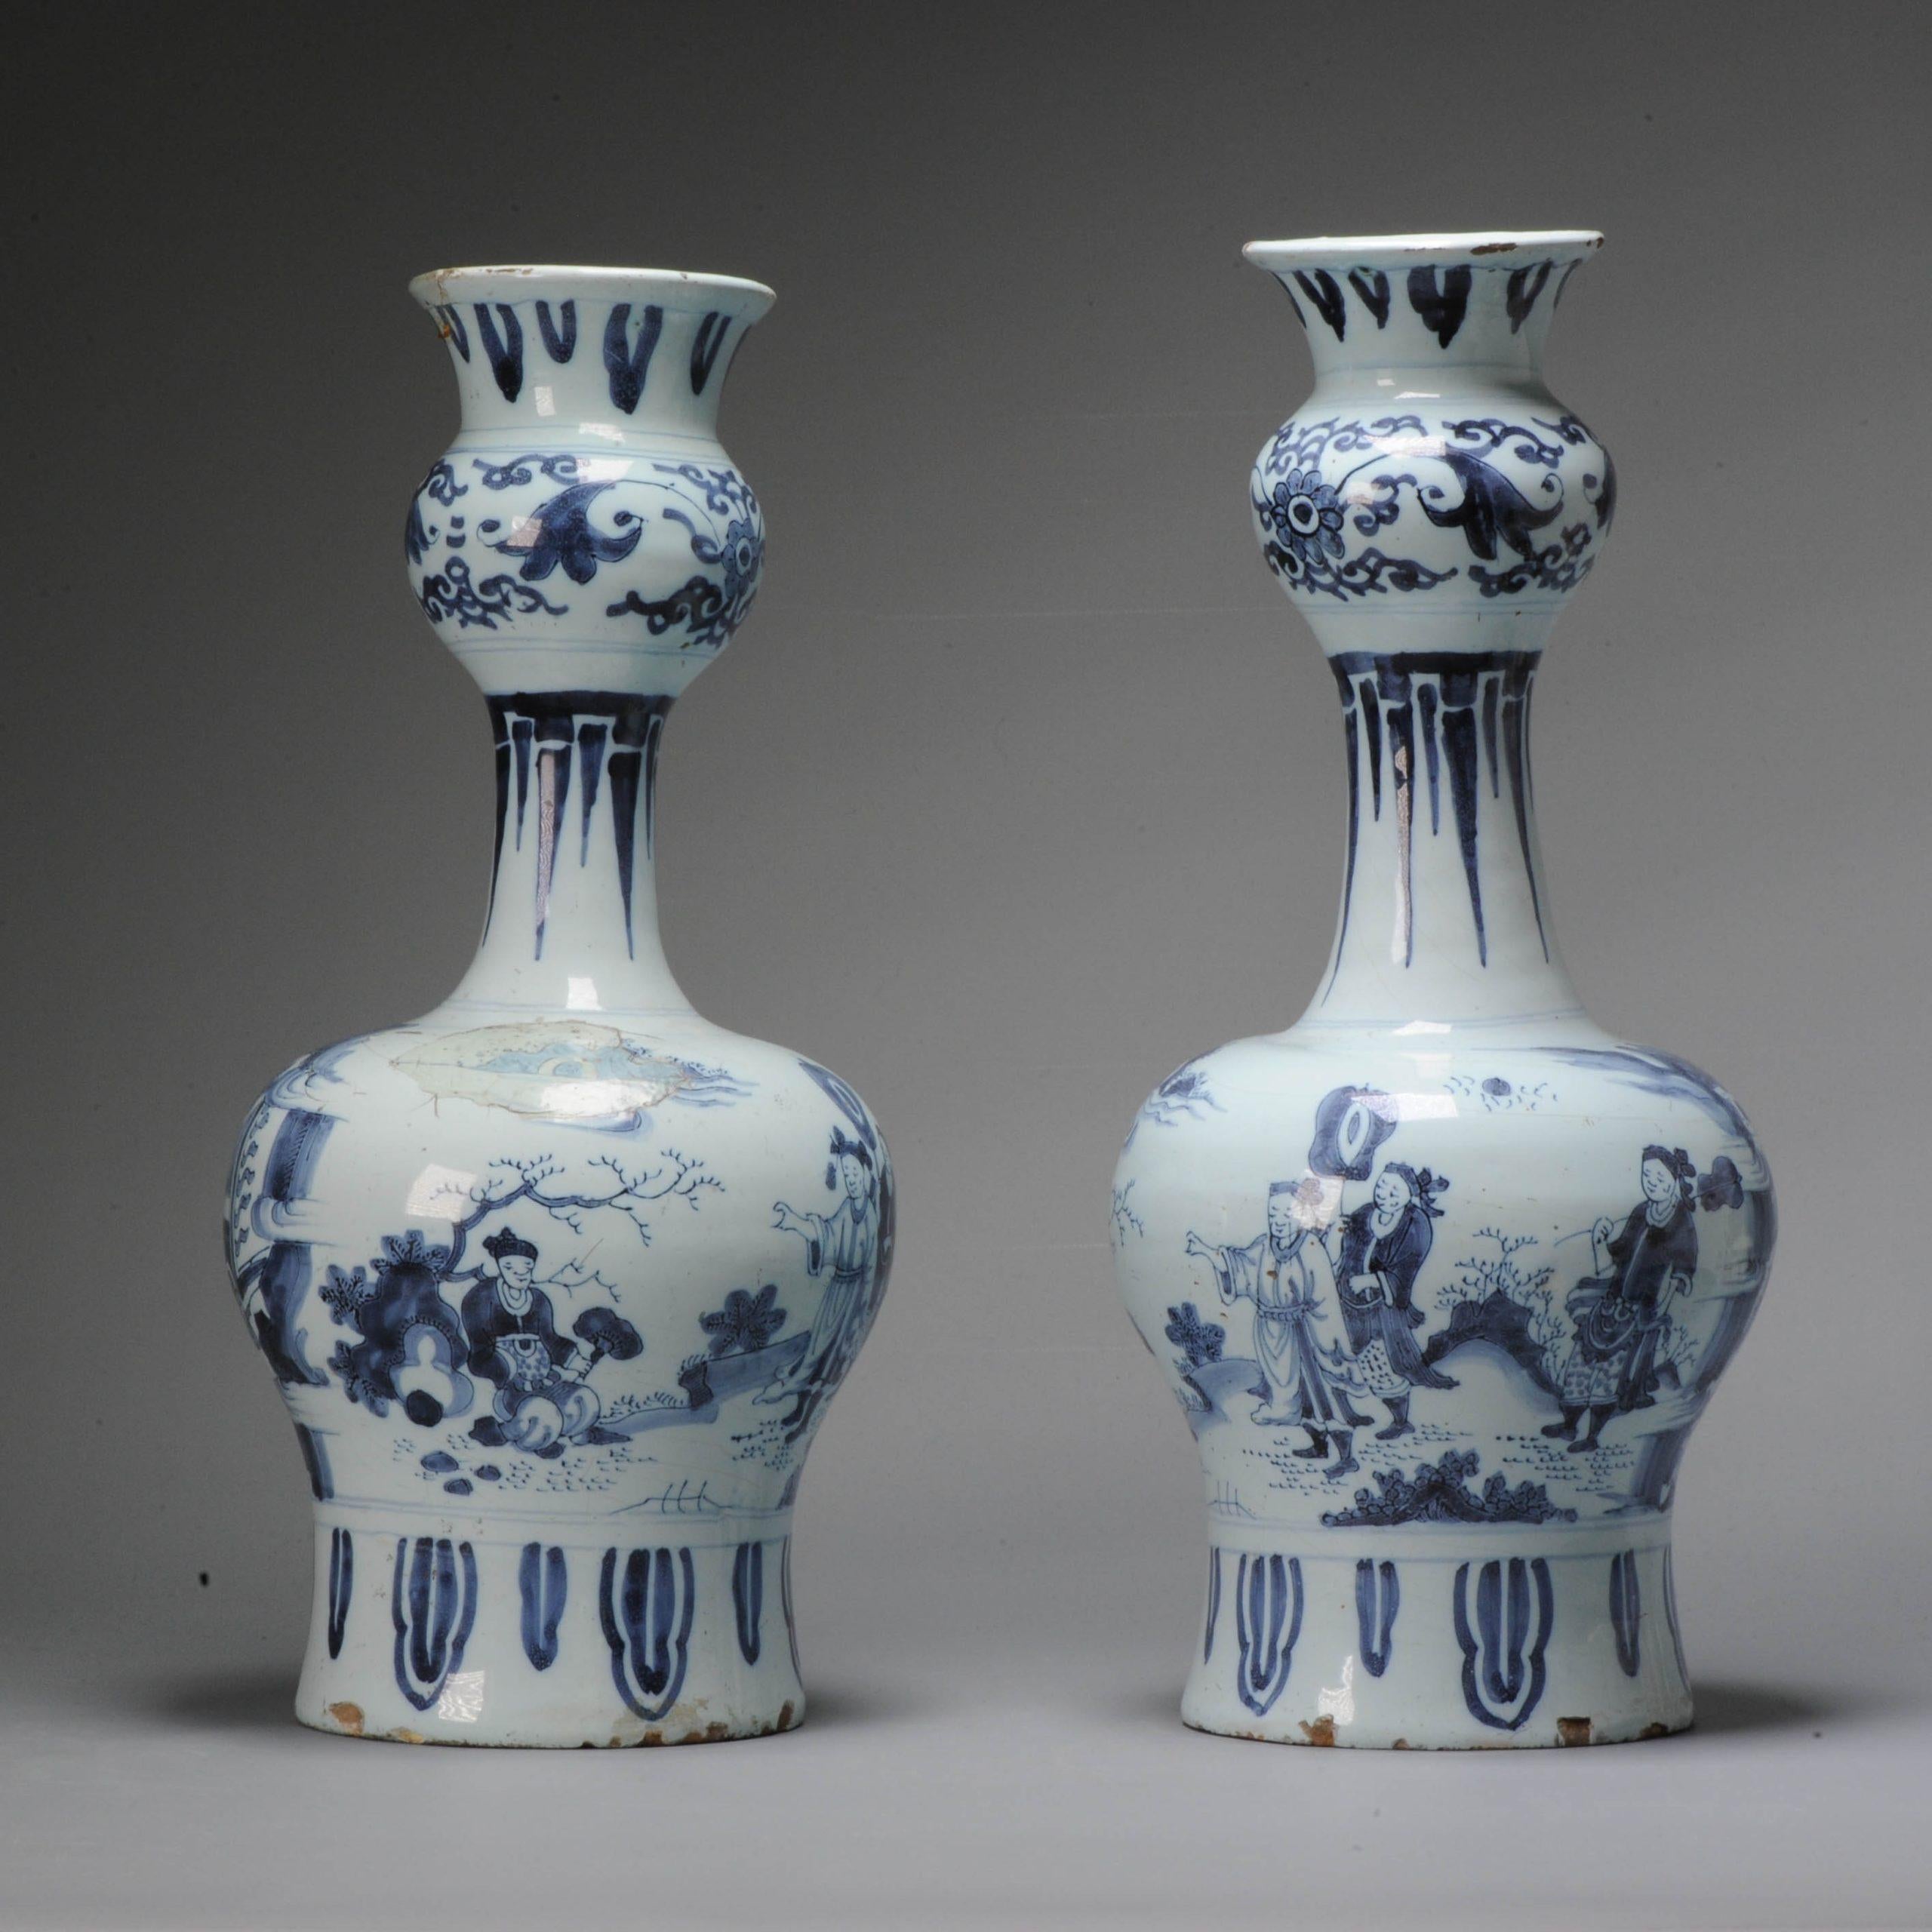 Unusual Dutch Delftware Figural Earthenware Vases in Chinese Transitional Style For Sale 1